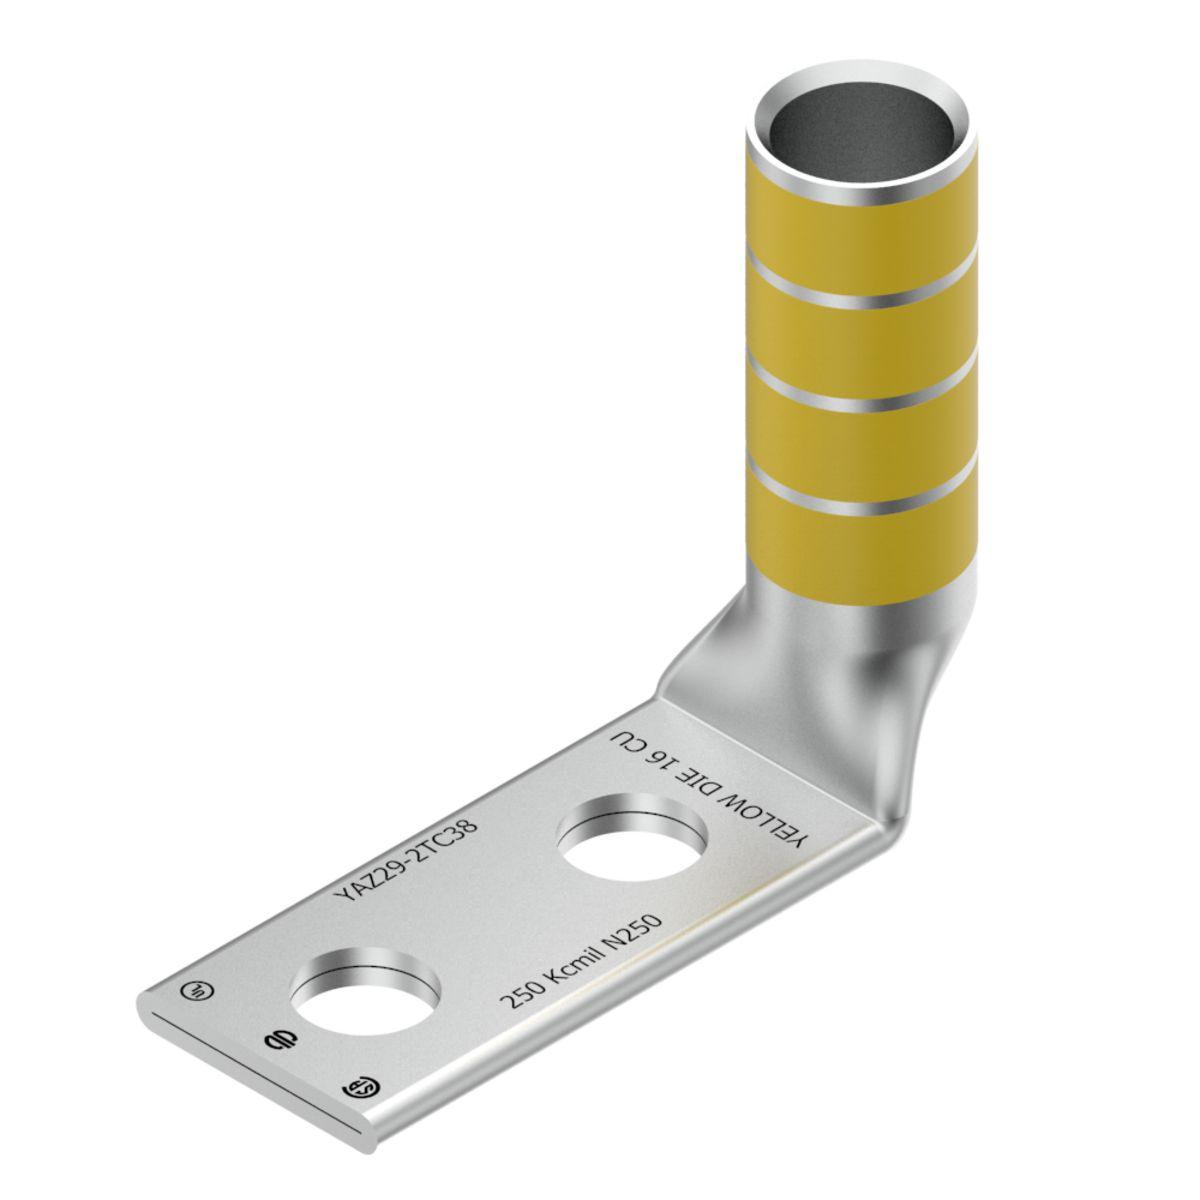 Hubbell YAZ292TC3890 250 kcmil CU, Two Hole, 3/8 Stud Size, 1 Hole Spacing, Long Barrel, Inspection Window Internal Chamfer, Tin Plated, UL/CSA, 90°C, Up to 35kV, Yellow Color Code, 16 Die Index. 